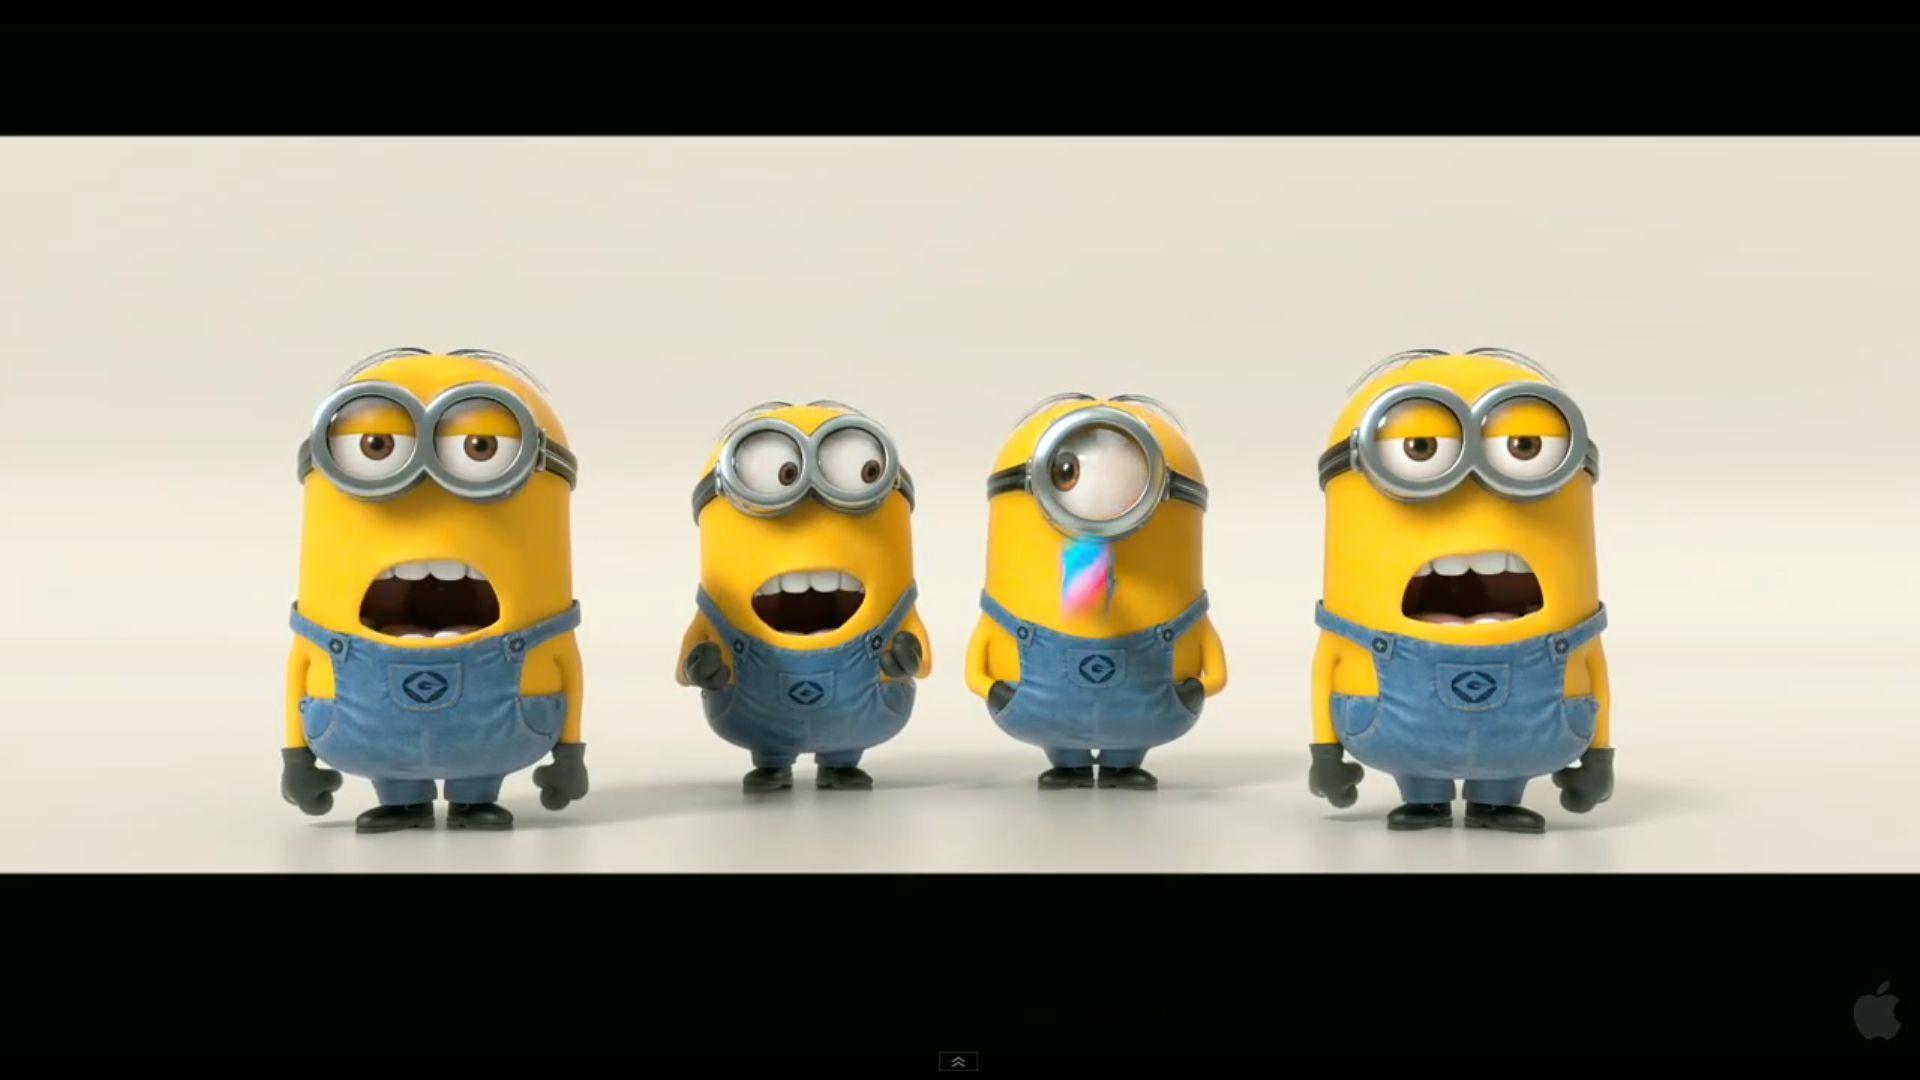 Free Desktop Background Image Minions. Wallpaper and Image